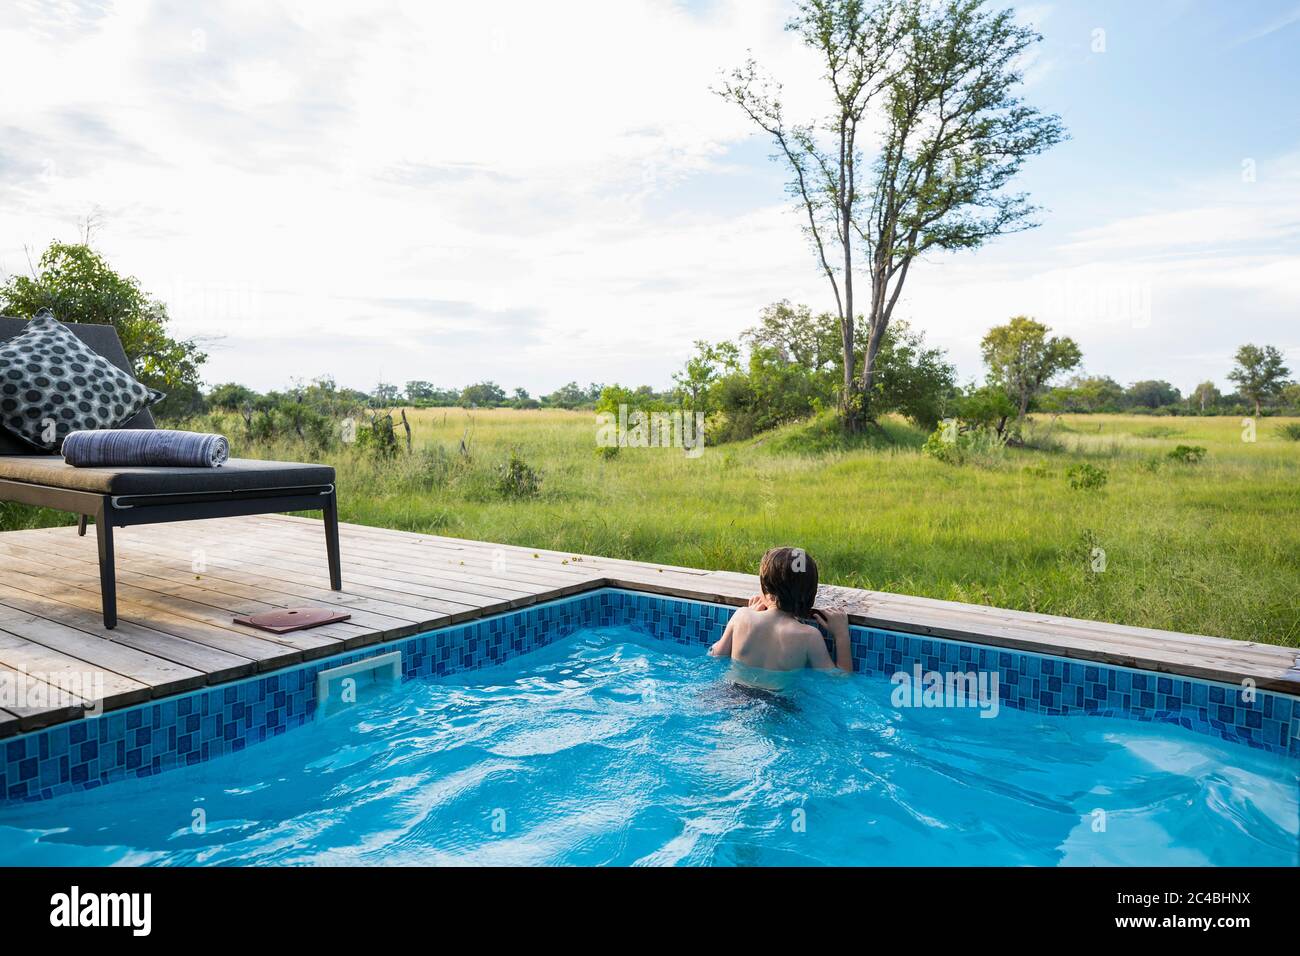 A boy in a swimming pool looking out at the landscape around a safari camp Stock Photo